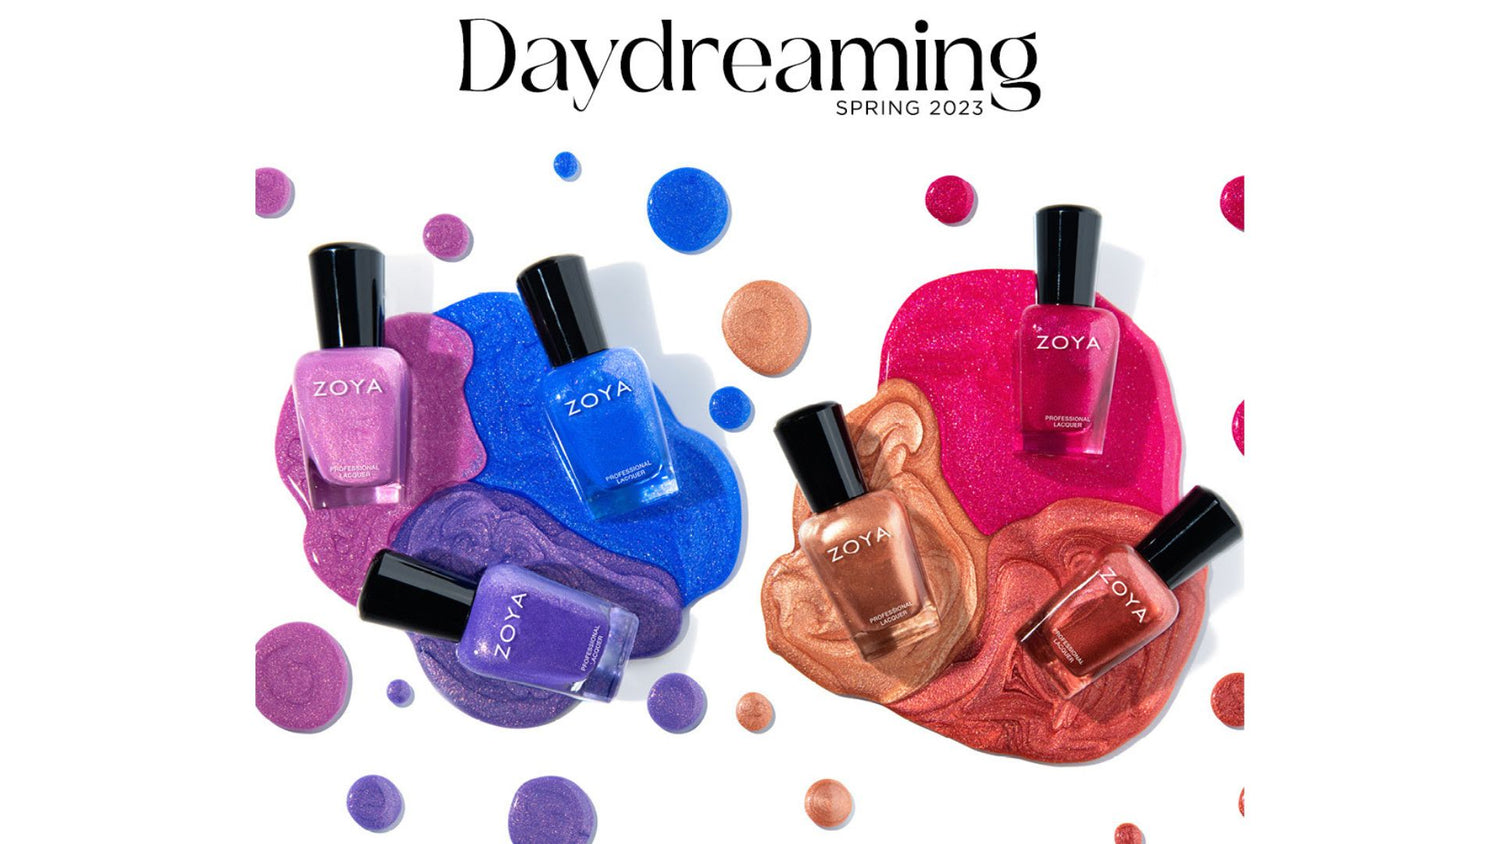 review, photos, ingredients, trends, 2023, 2024, zoya, daydream collection, spring 2023 collection, best new nail polishes, best new nail lacquers, toxin free nail polish, marie, terra, tink, sipsey, yardley